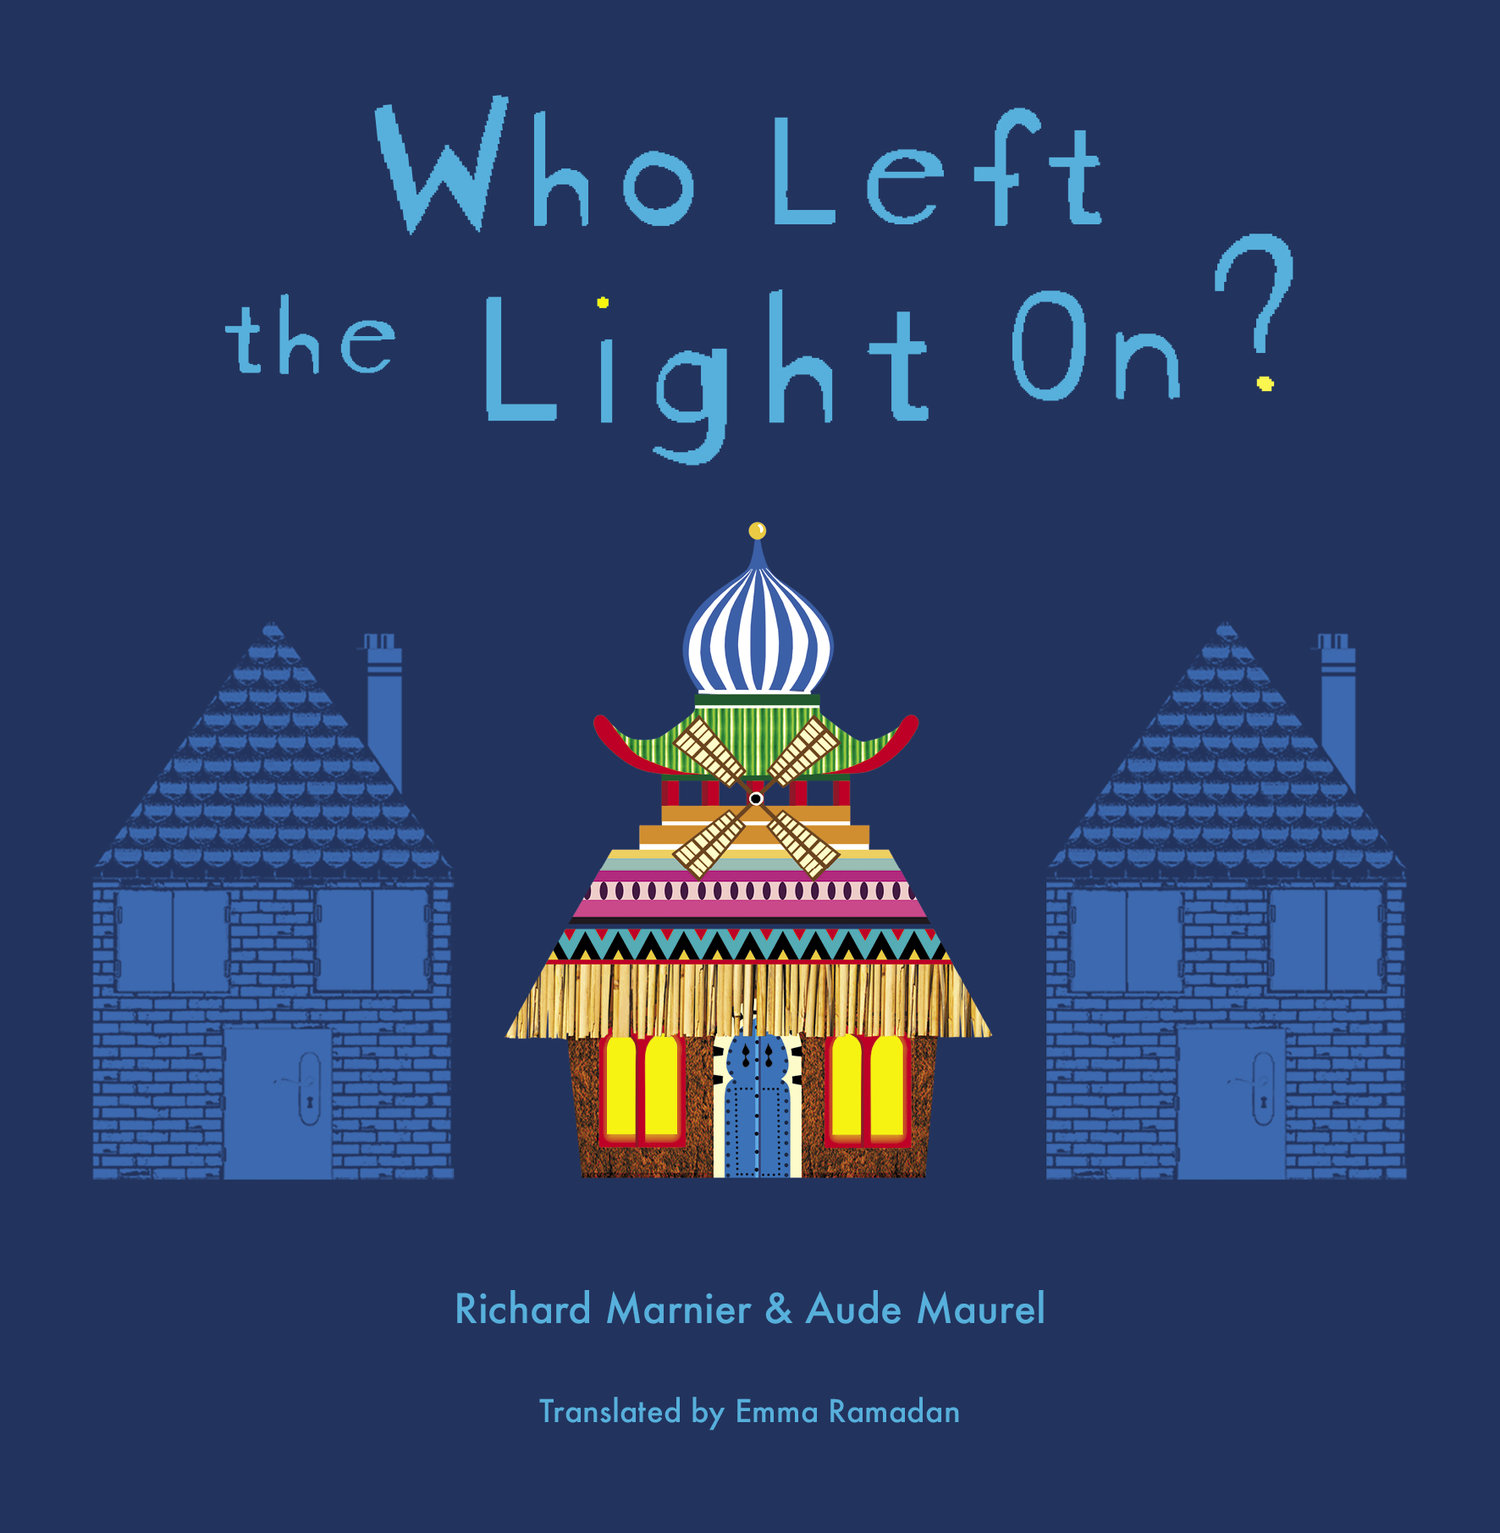 who left the light on? Book by Richard Marnier and Aude Maurel